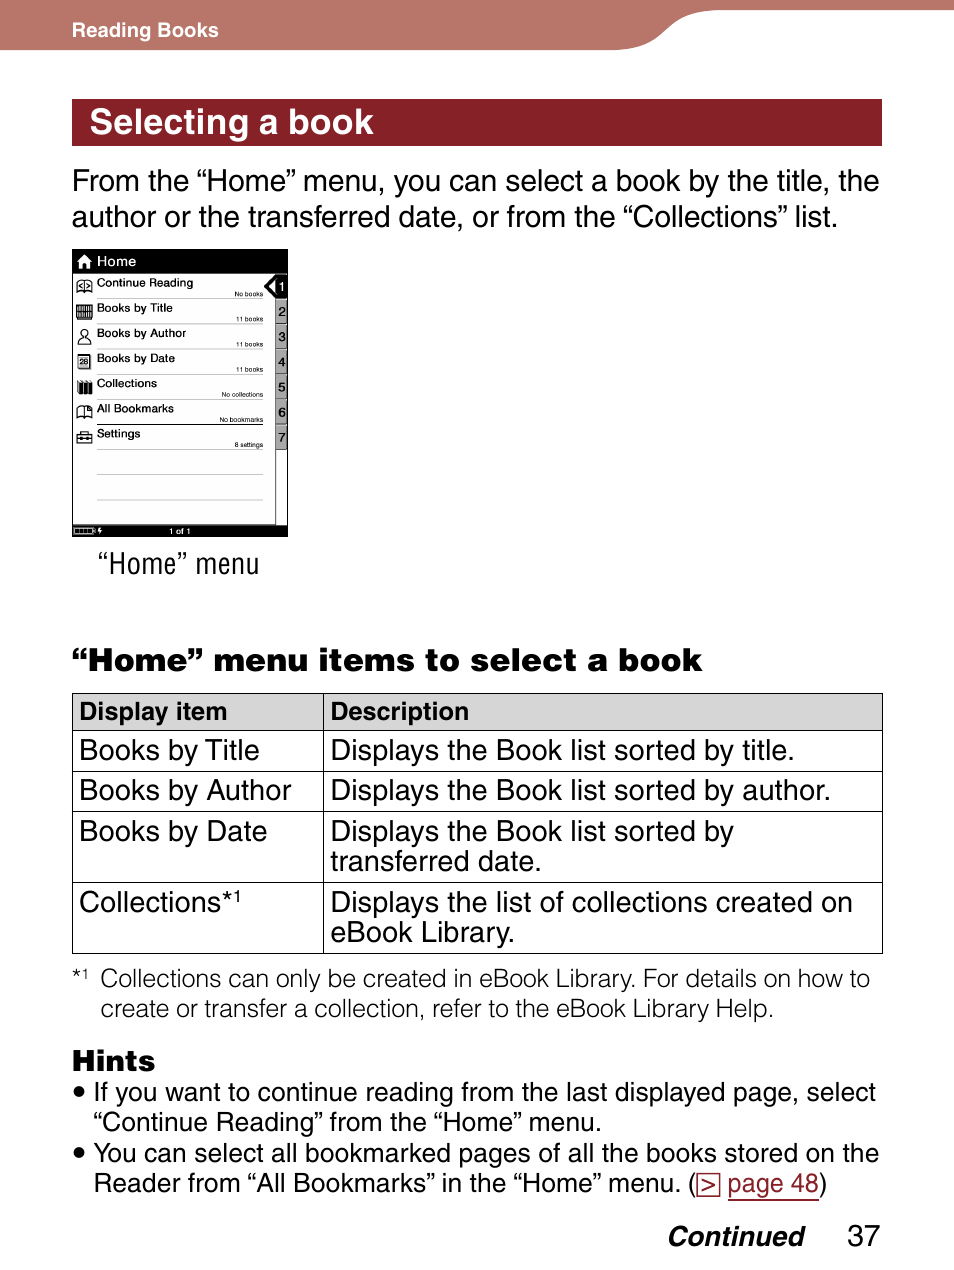 Selecting a book, Home” menu items to select a book | Sony PRS-300LC User Manual | Page 37 / 92